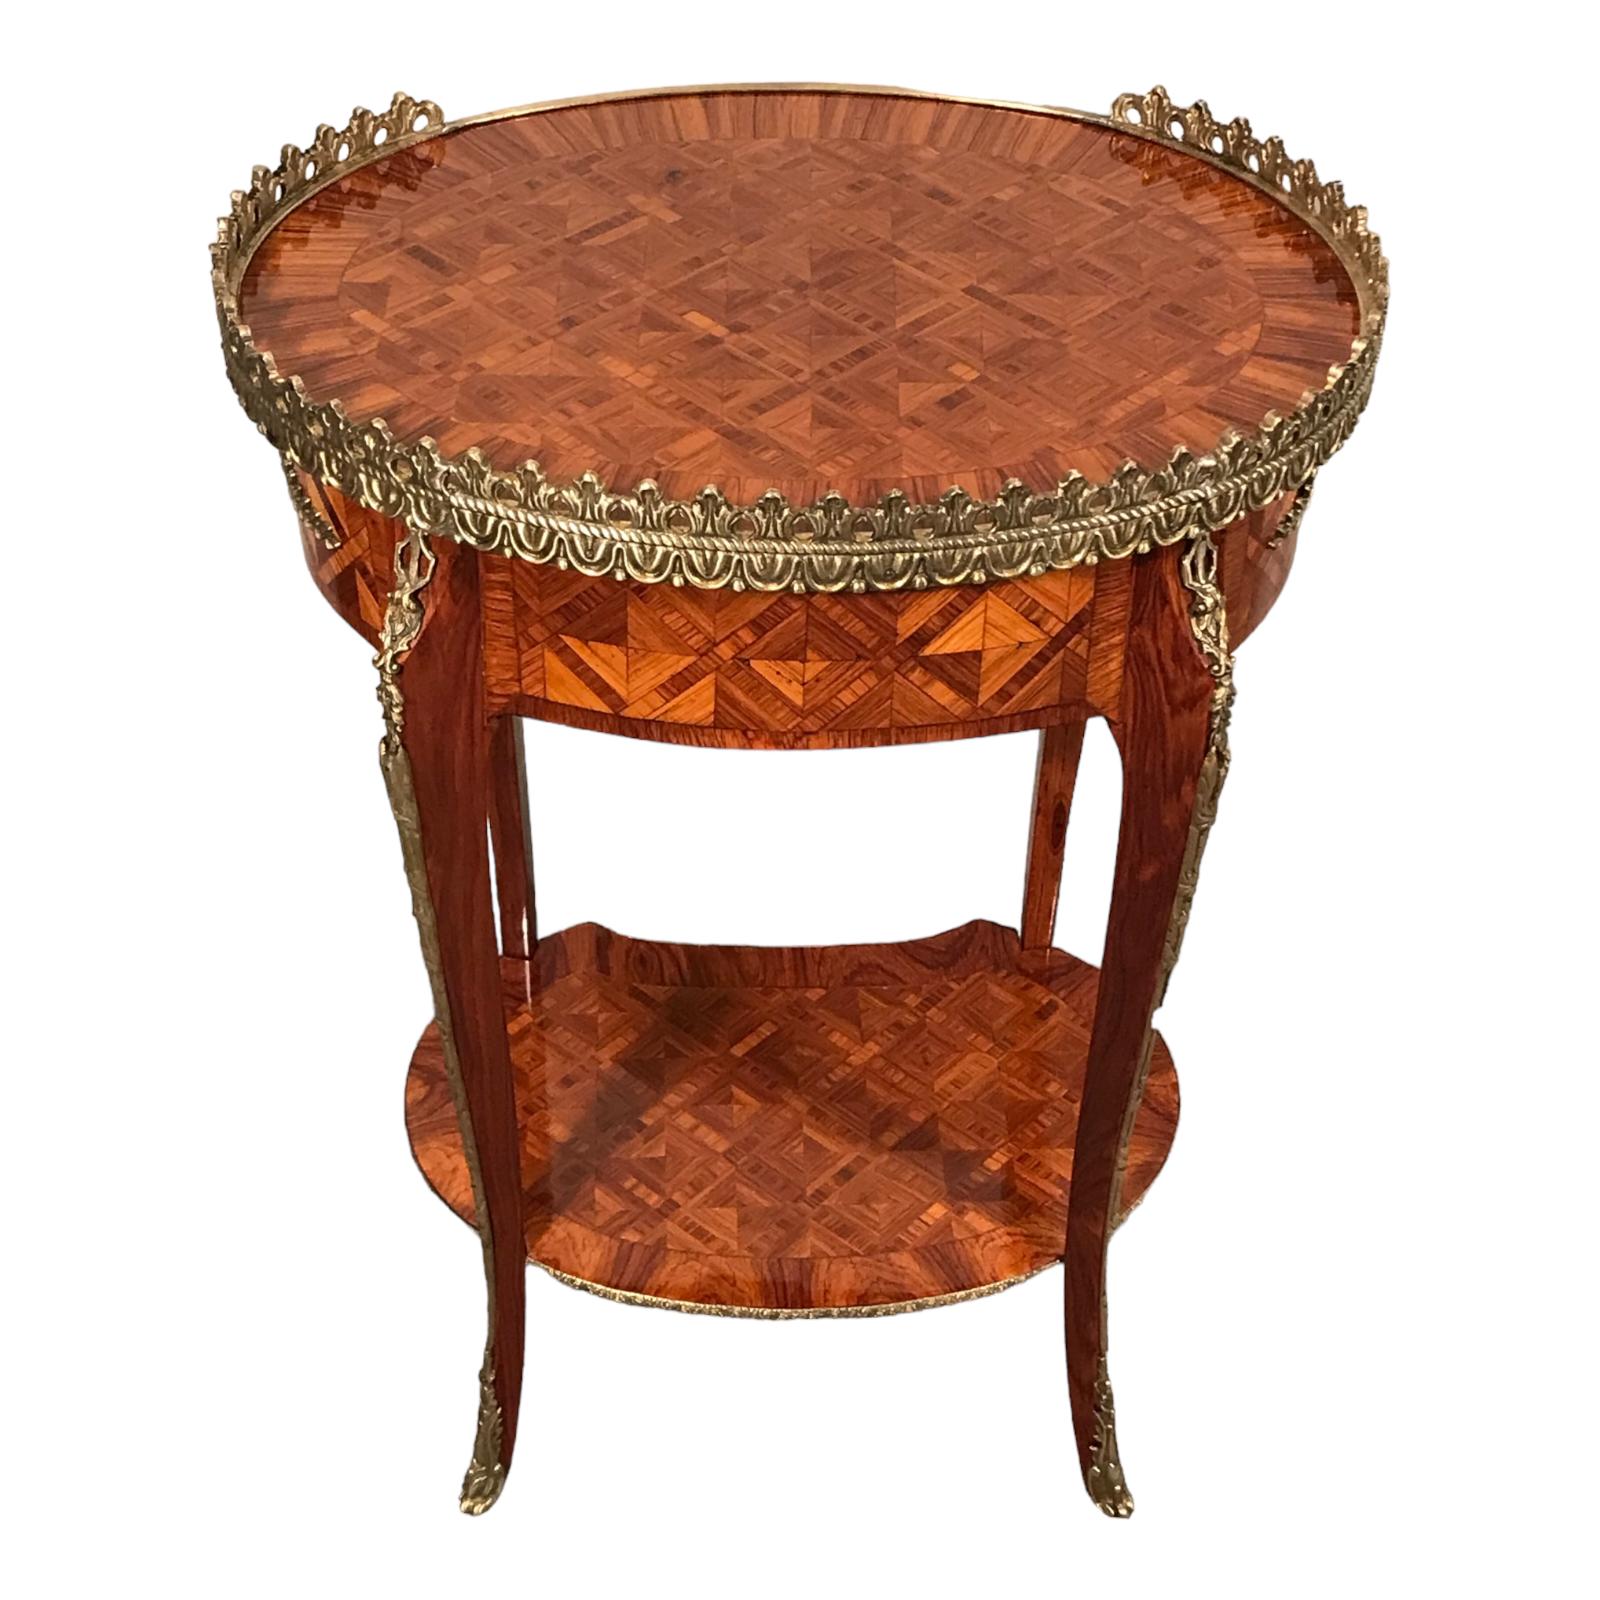 Discover our stunning pair of Napoleon III Side Tables, featuring elegant oval shapes standing on slender, slightly curved legs adorned with intricate floral brass fittings. Each table boasts a convenient drawer in the upper part, complemented by a